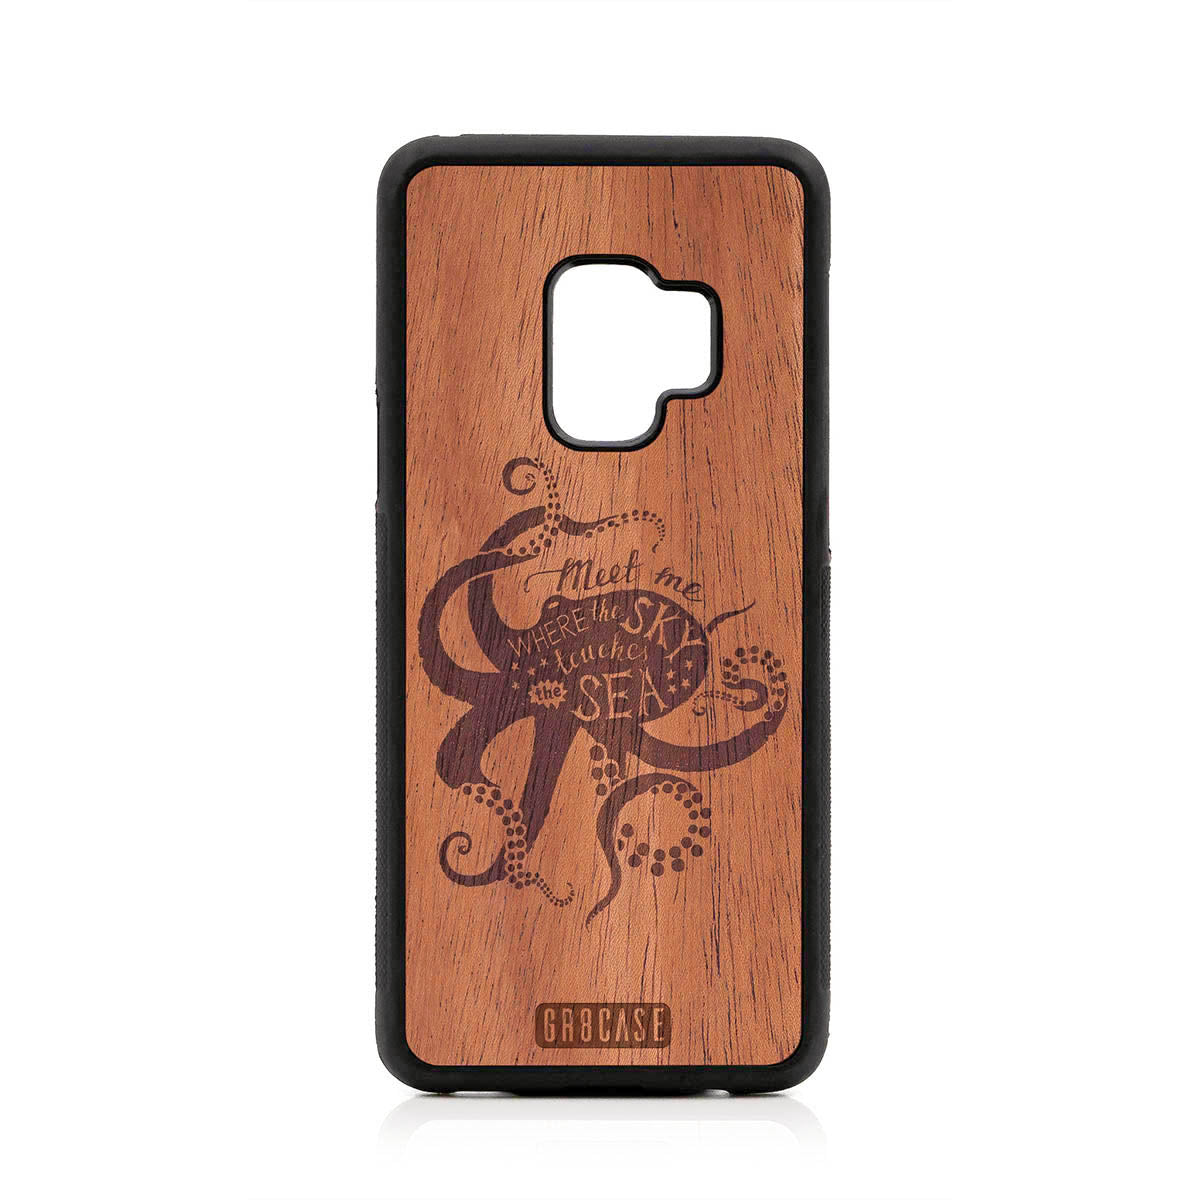 Meet Me Where The Sky Touches The Sea (Octopus) Design Wood Case For Samsung Galaxy S9